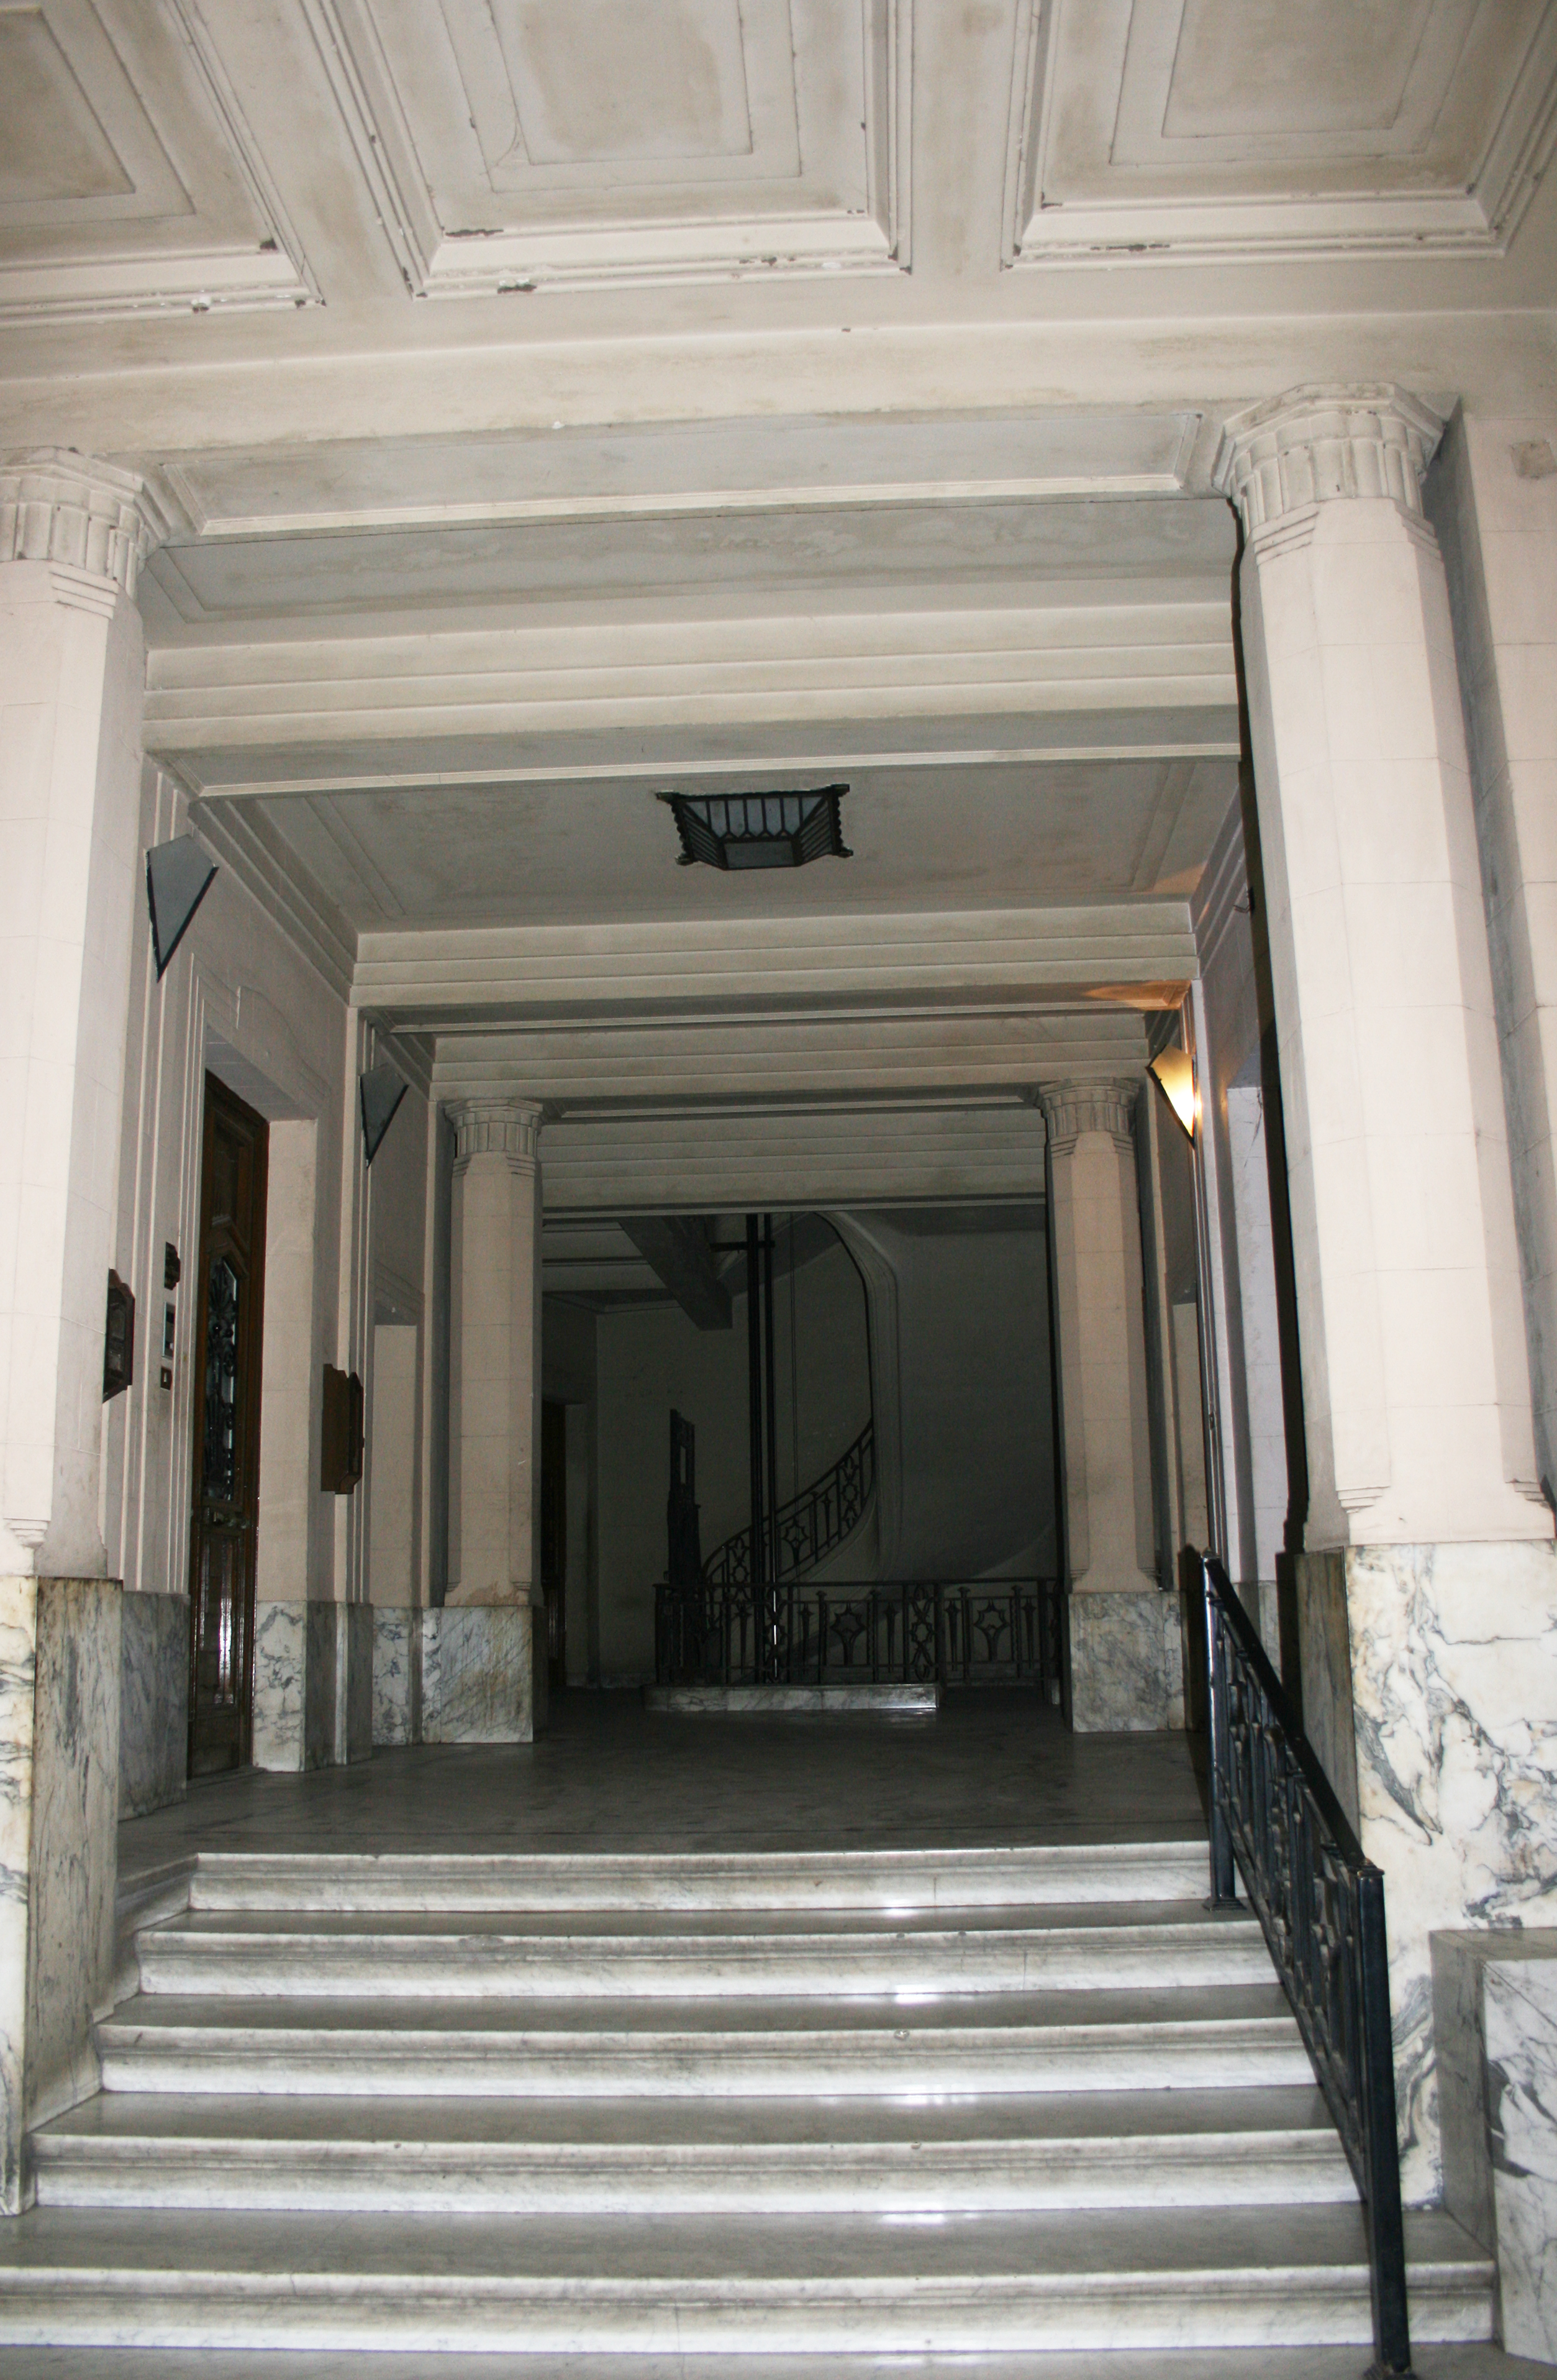 The entrance hall opens onto a first marble set of stairs with Neo-classical columns